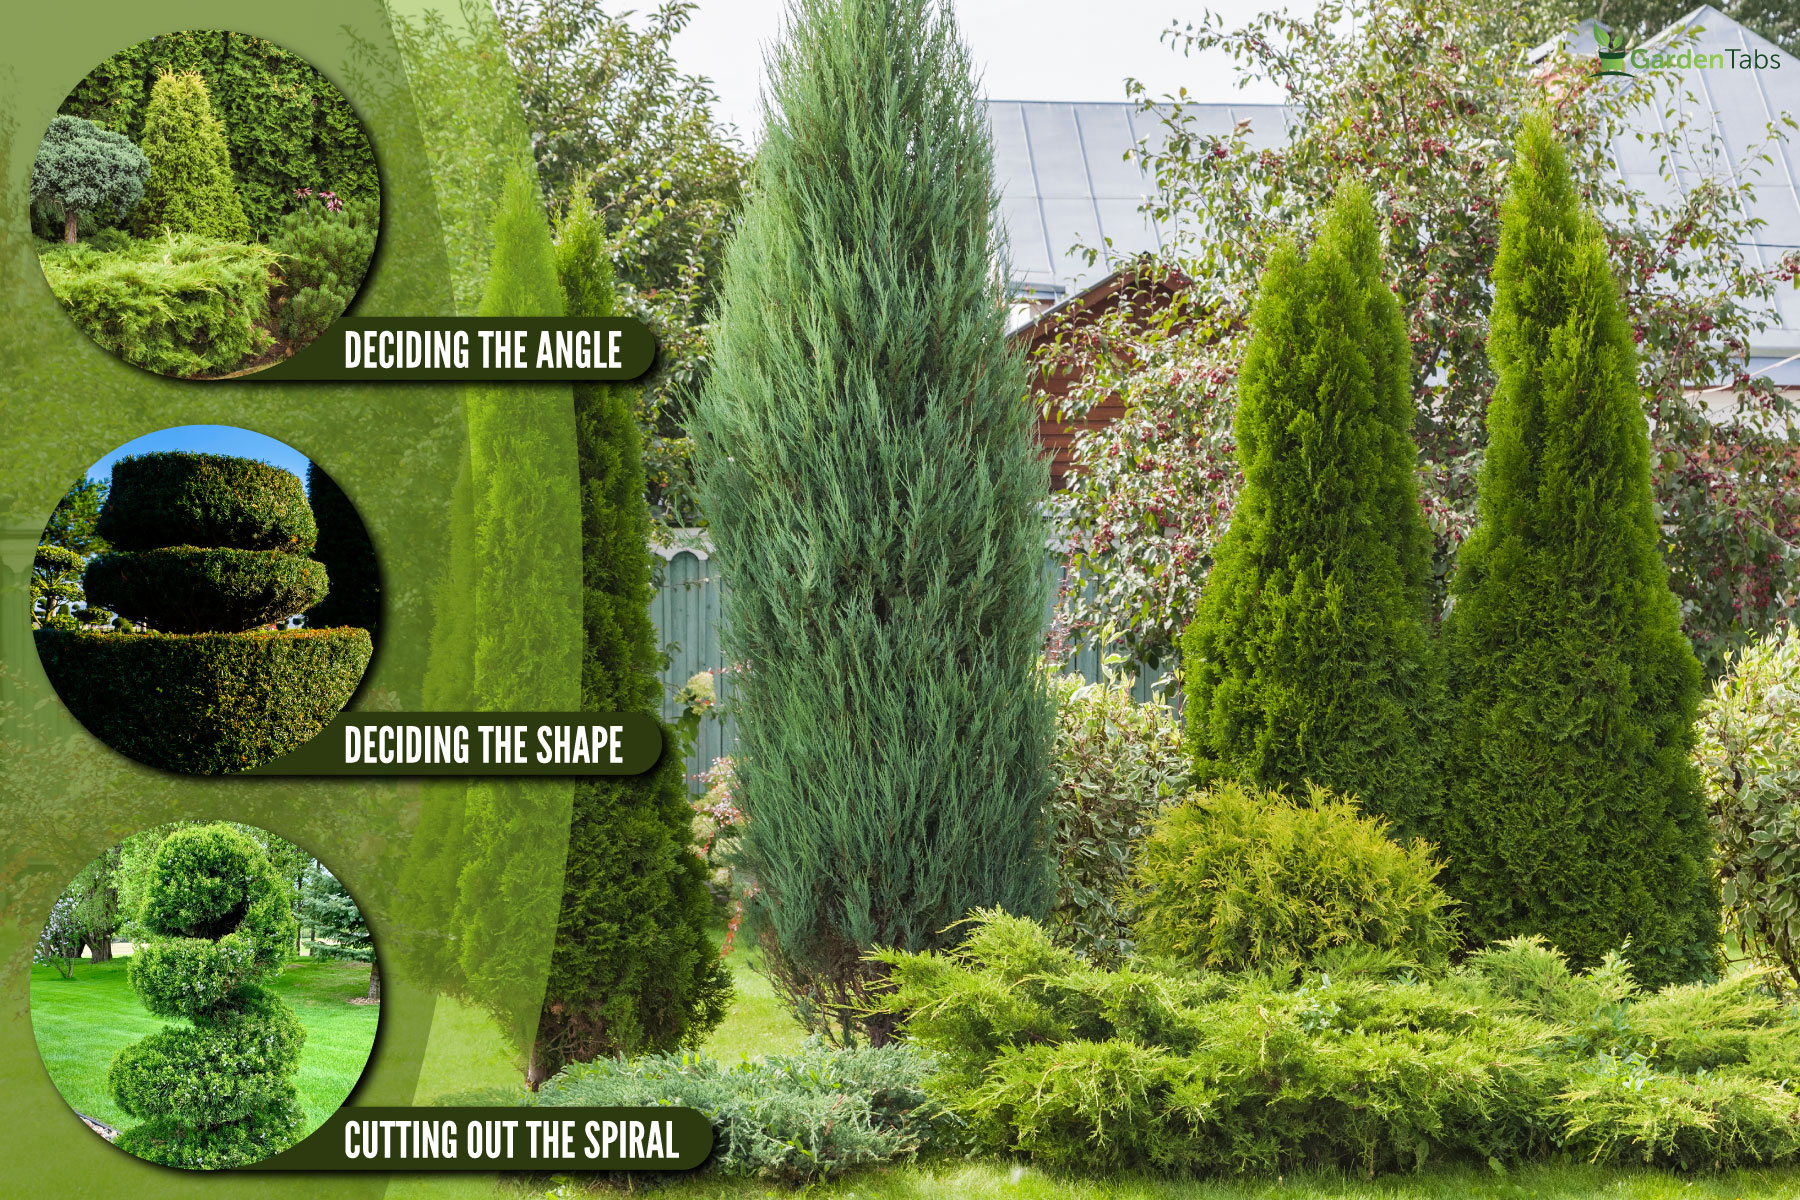 landscaping-conifers-mix-trees-shrubs, How To Shape A Conifer Tree Into A Spiral [Step By Step Guide]